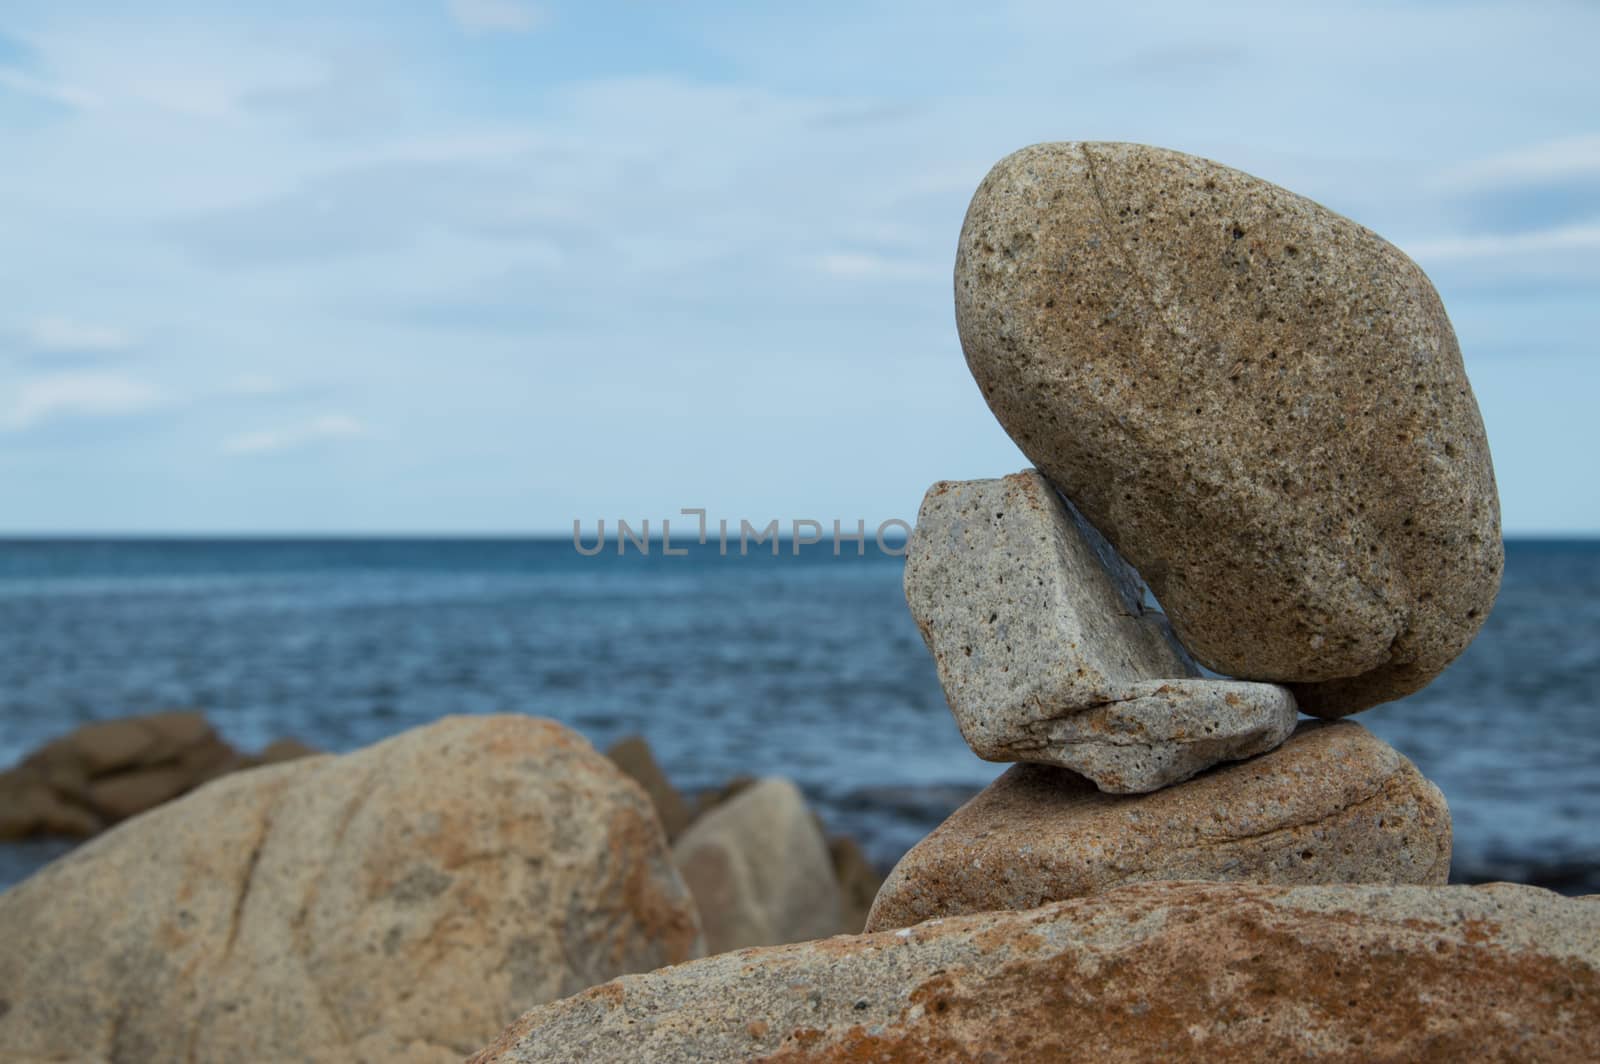 Stone balance by the sea by Faurinz